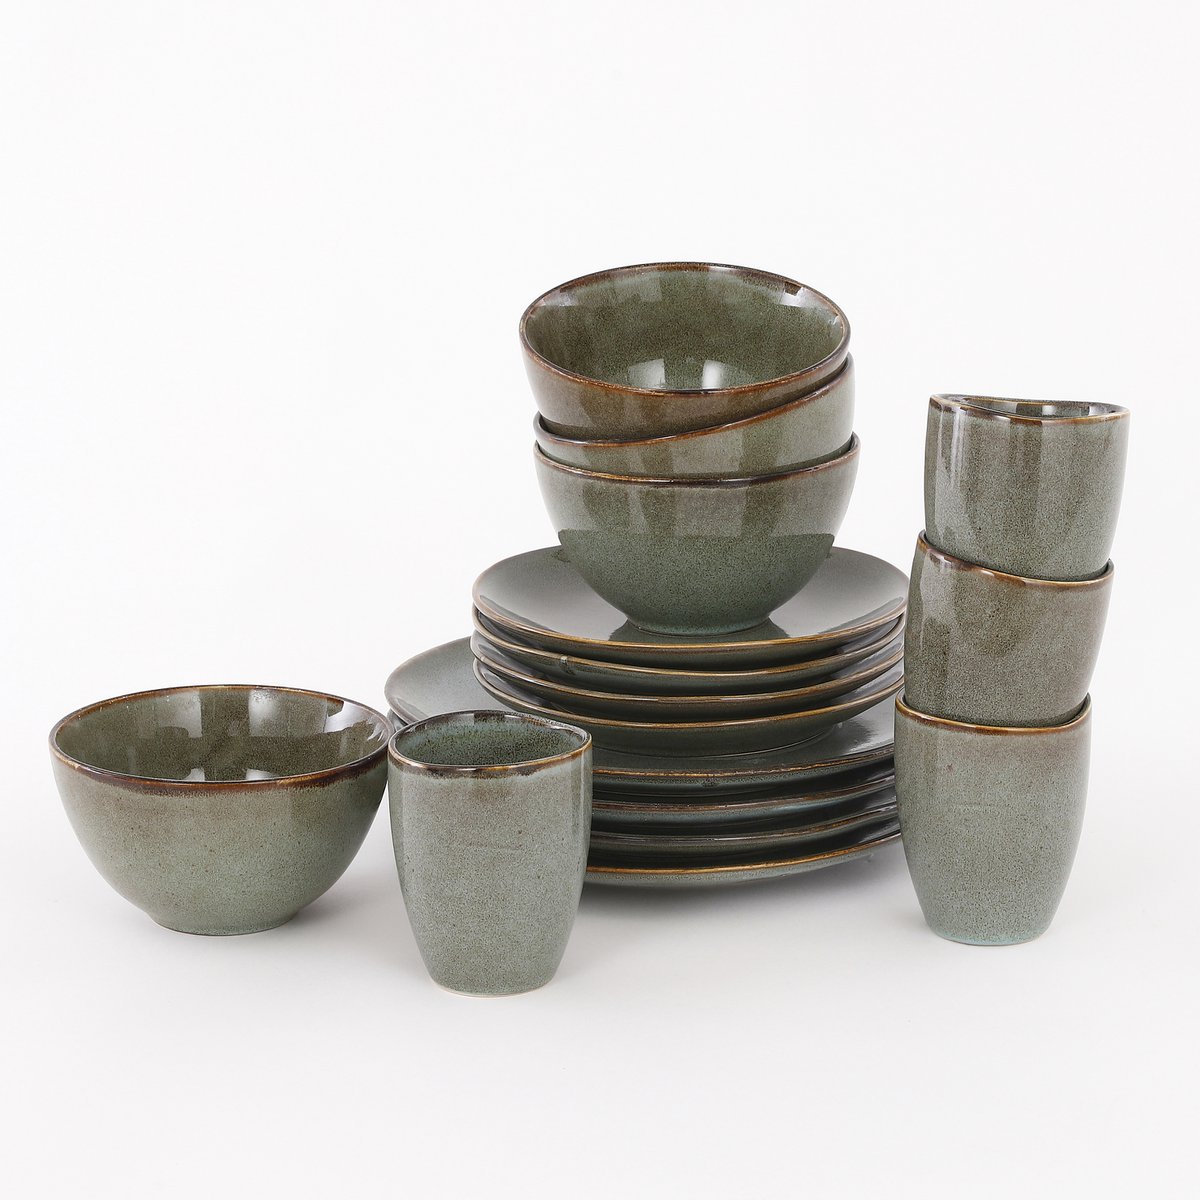 Tabo tableware set for 4 people - green